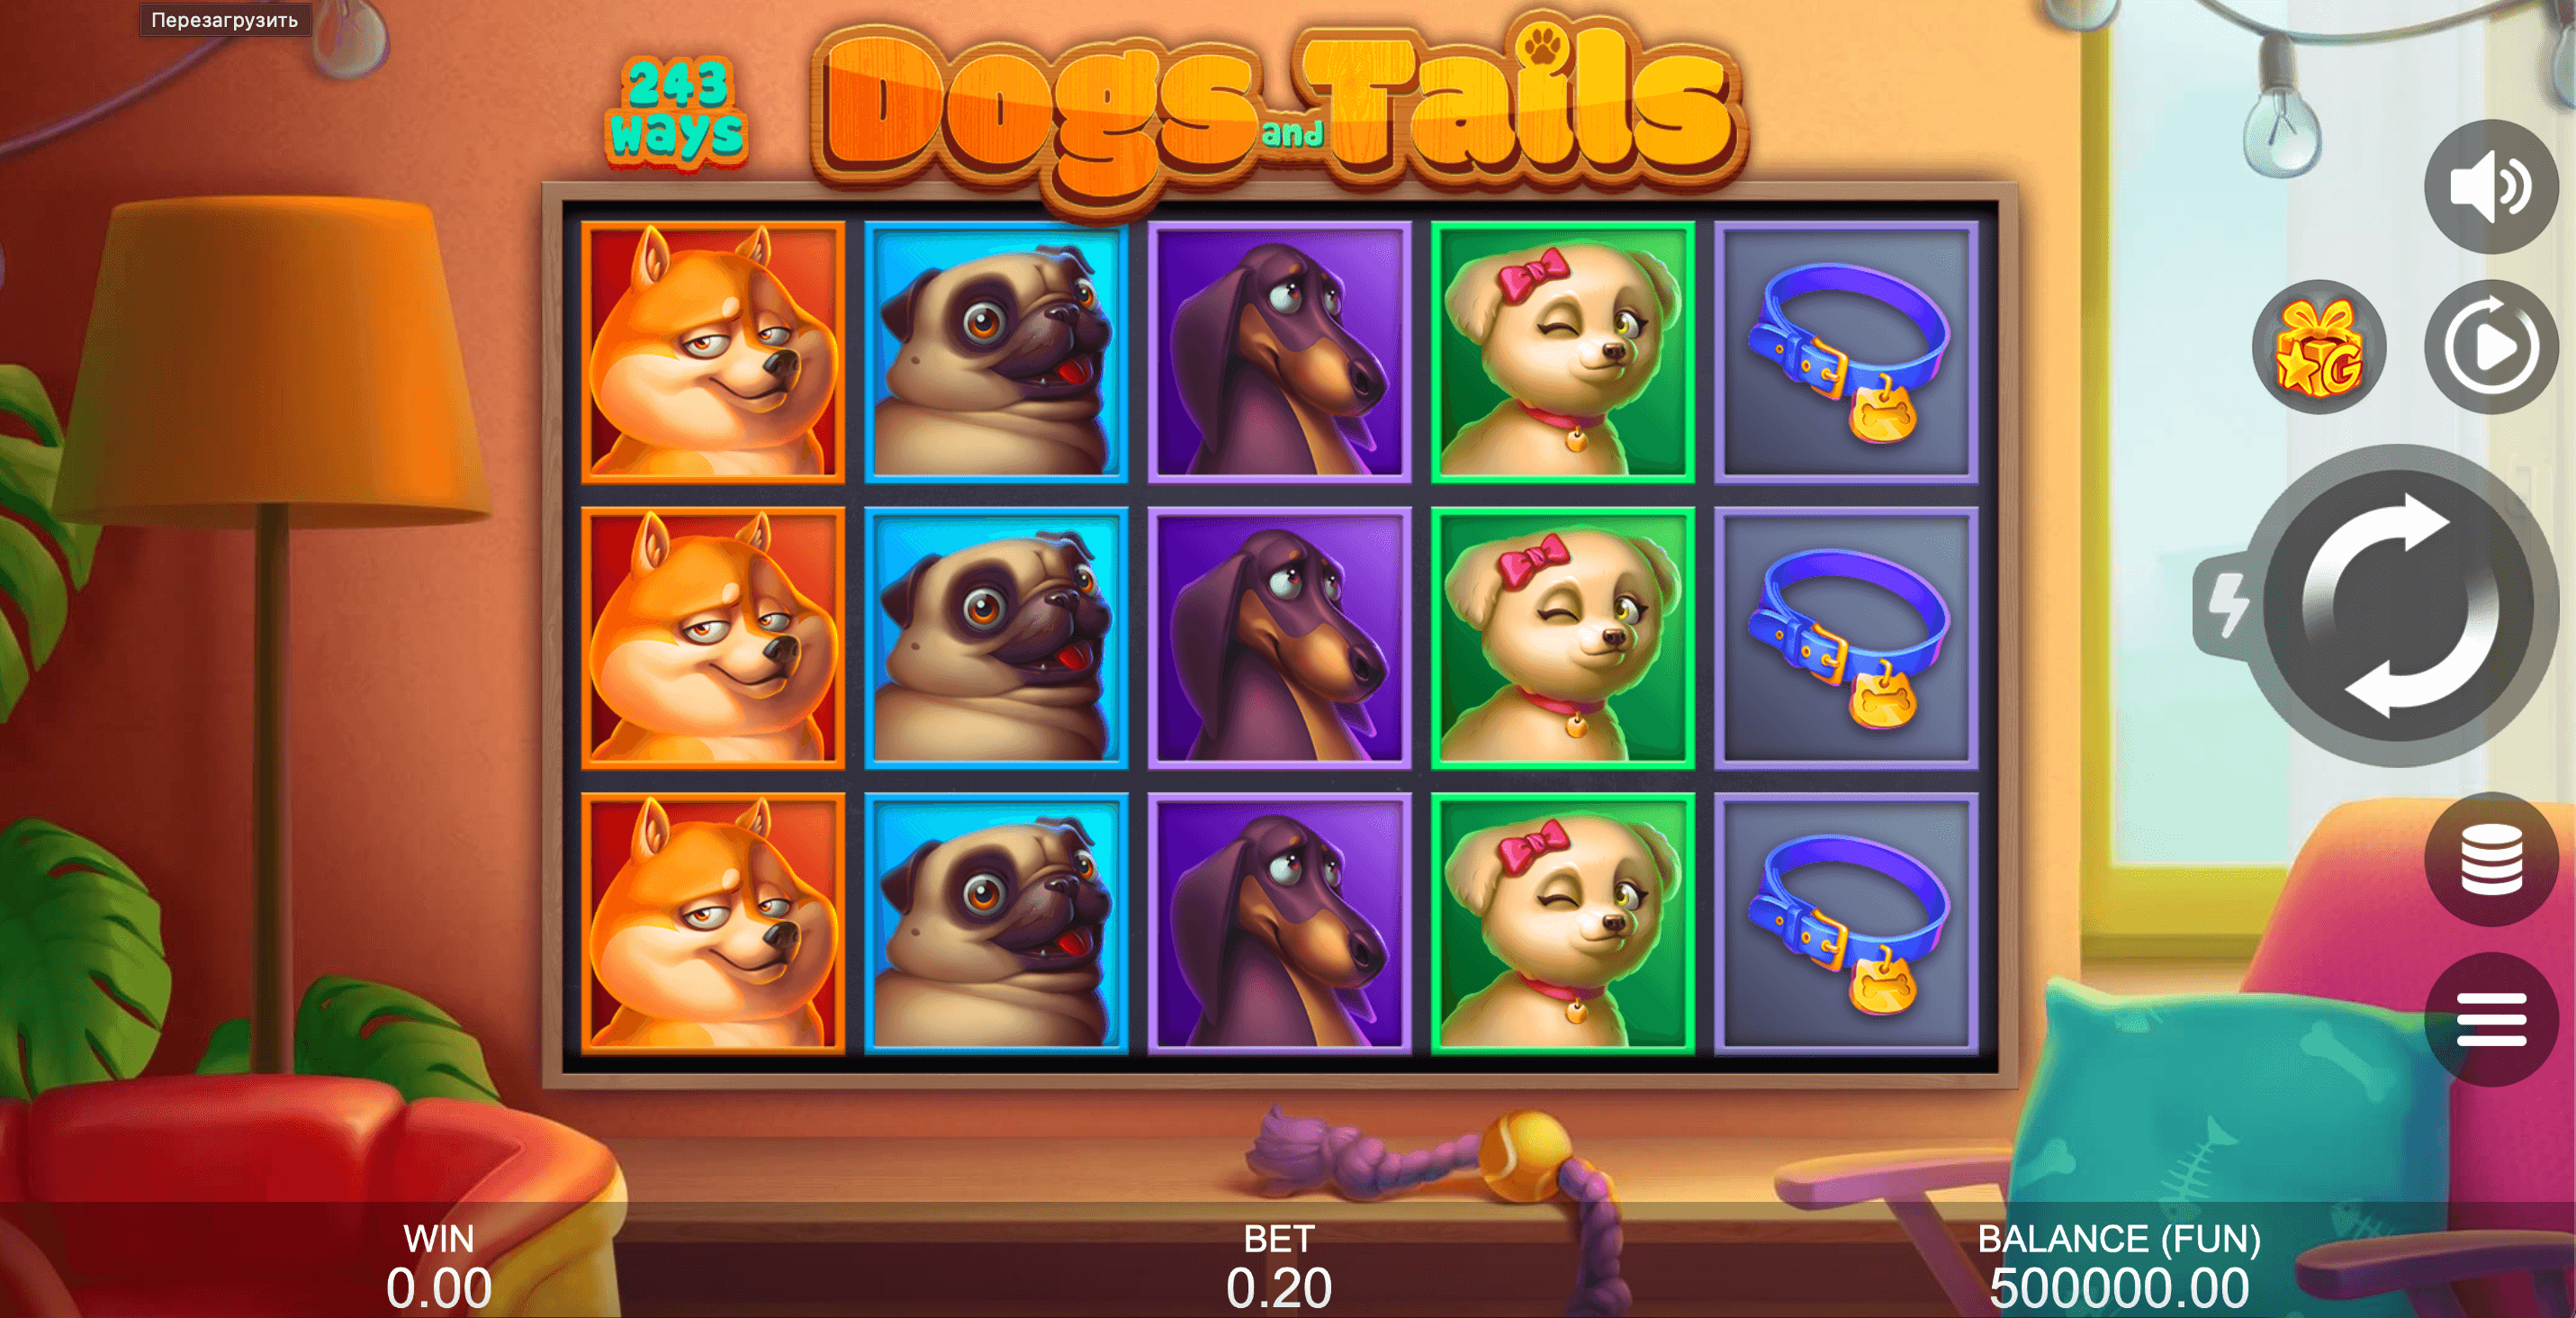 Dogs and Tails Spel proces